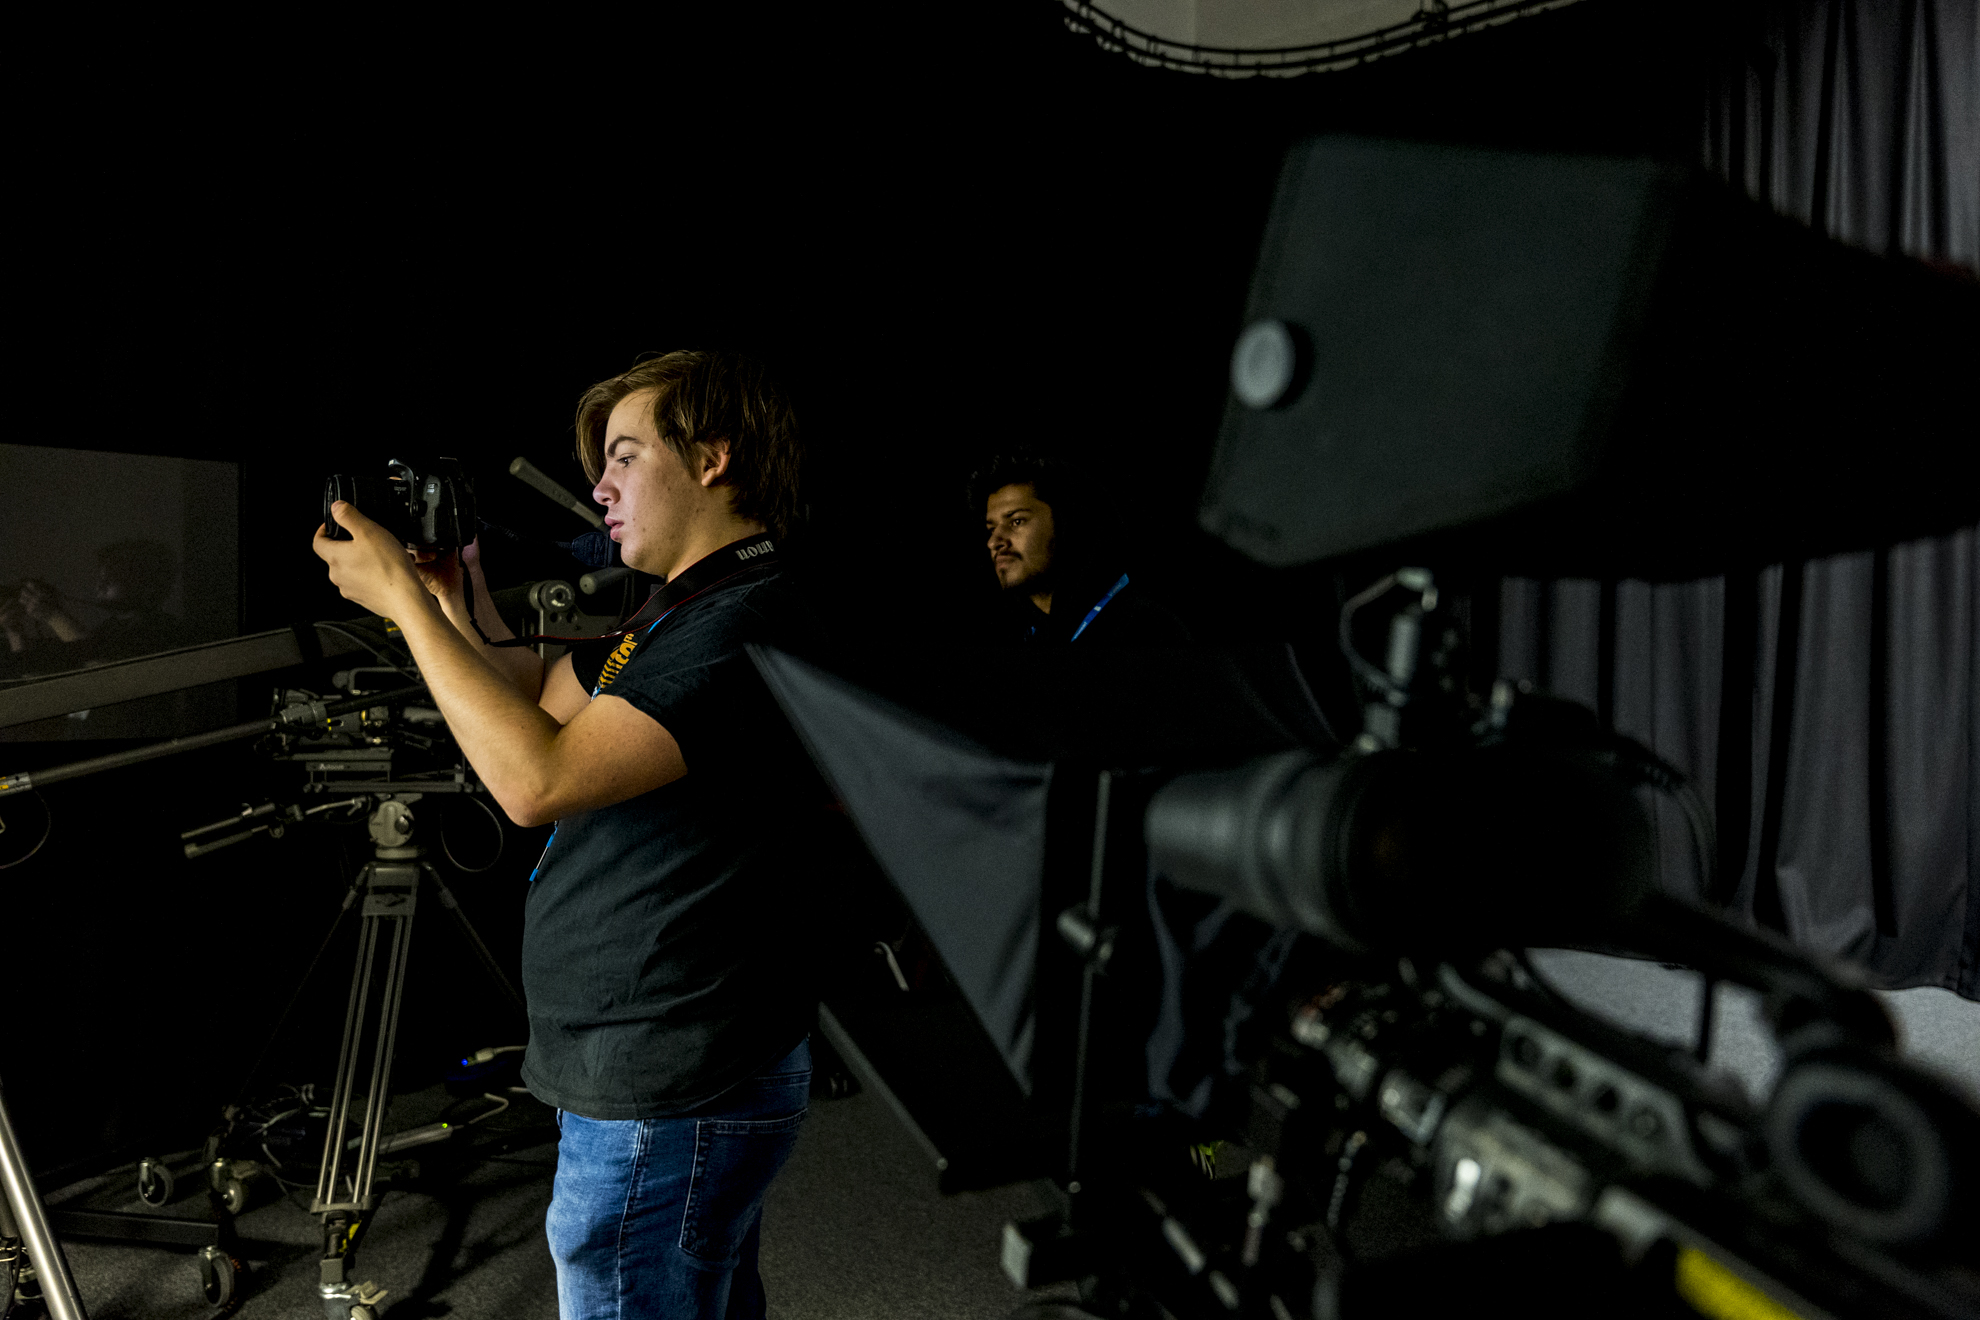 BA (Hons) (Top-up) Film and Media Production for the Creative Industries